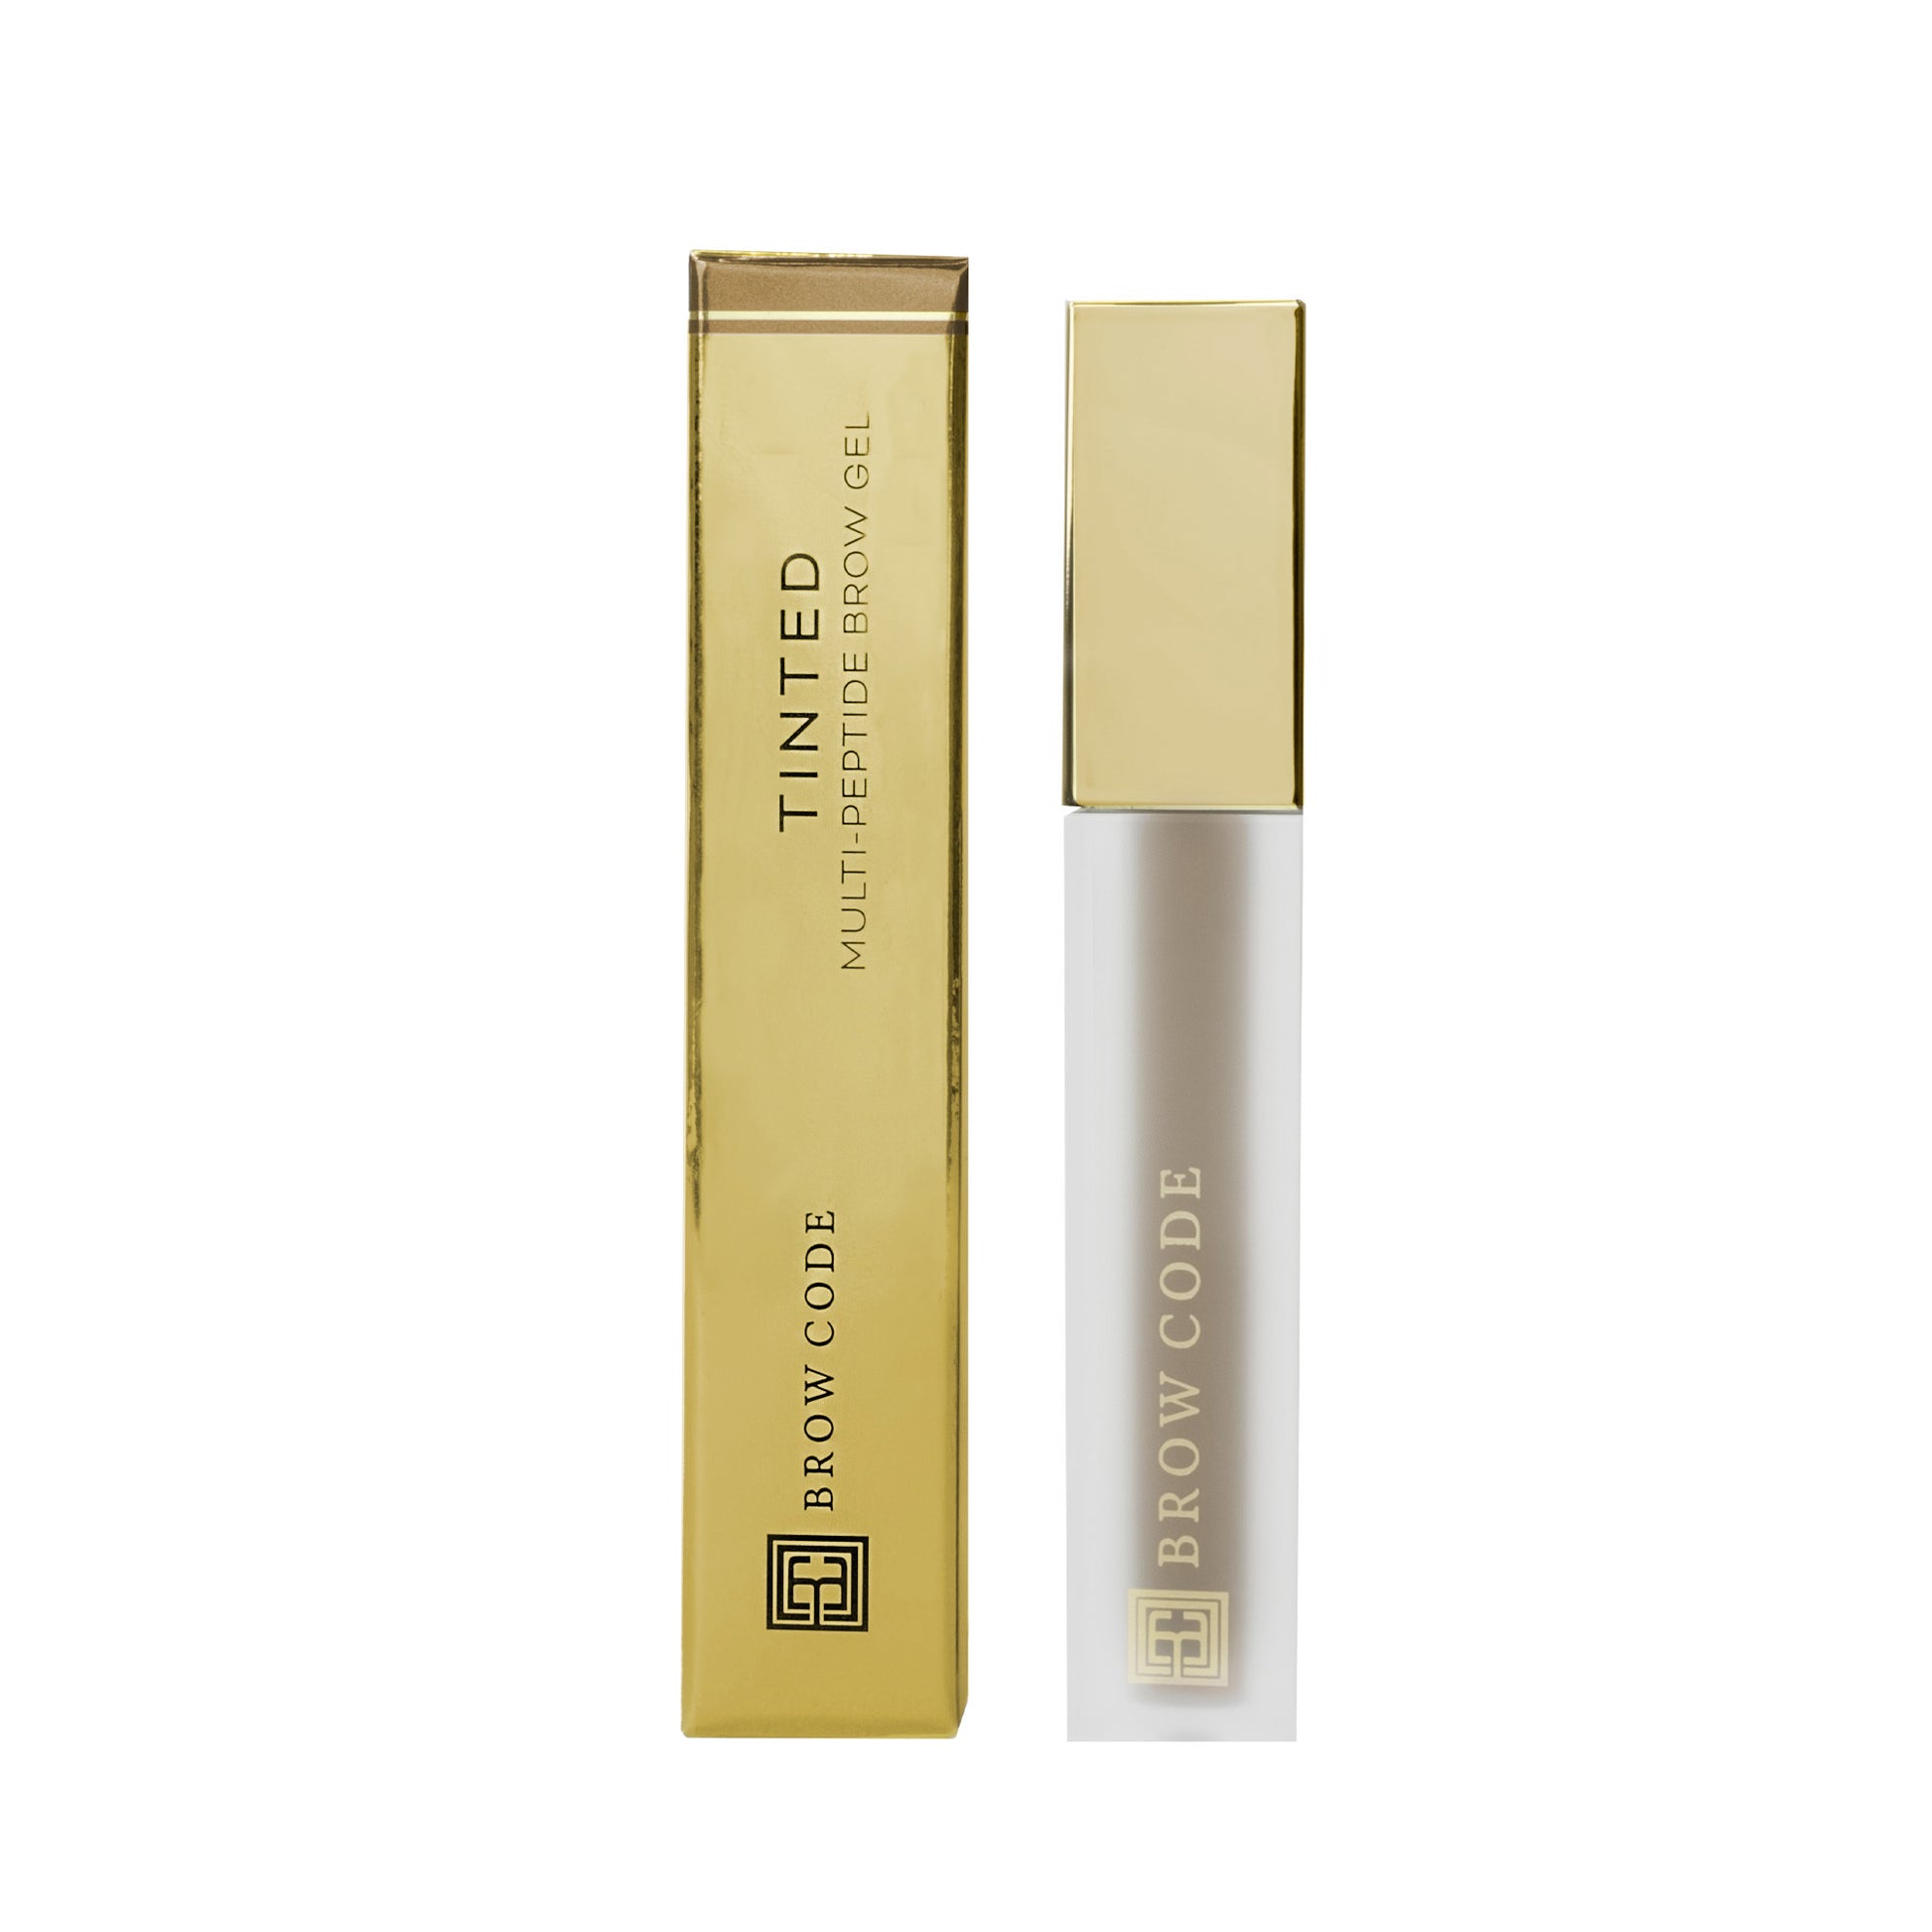 Tinted Multi-Peptide Brow Gel - Color-Taupe - product alongside packaging against a white background